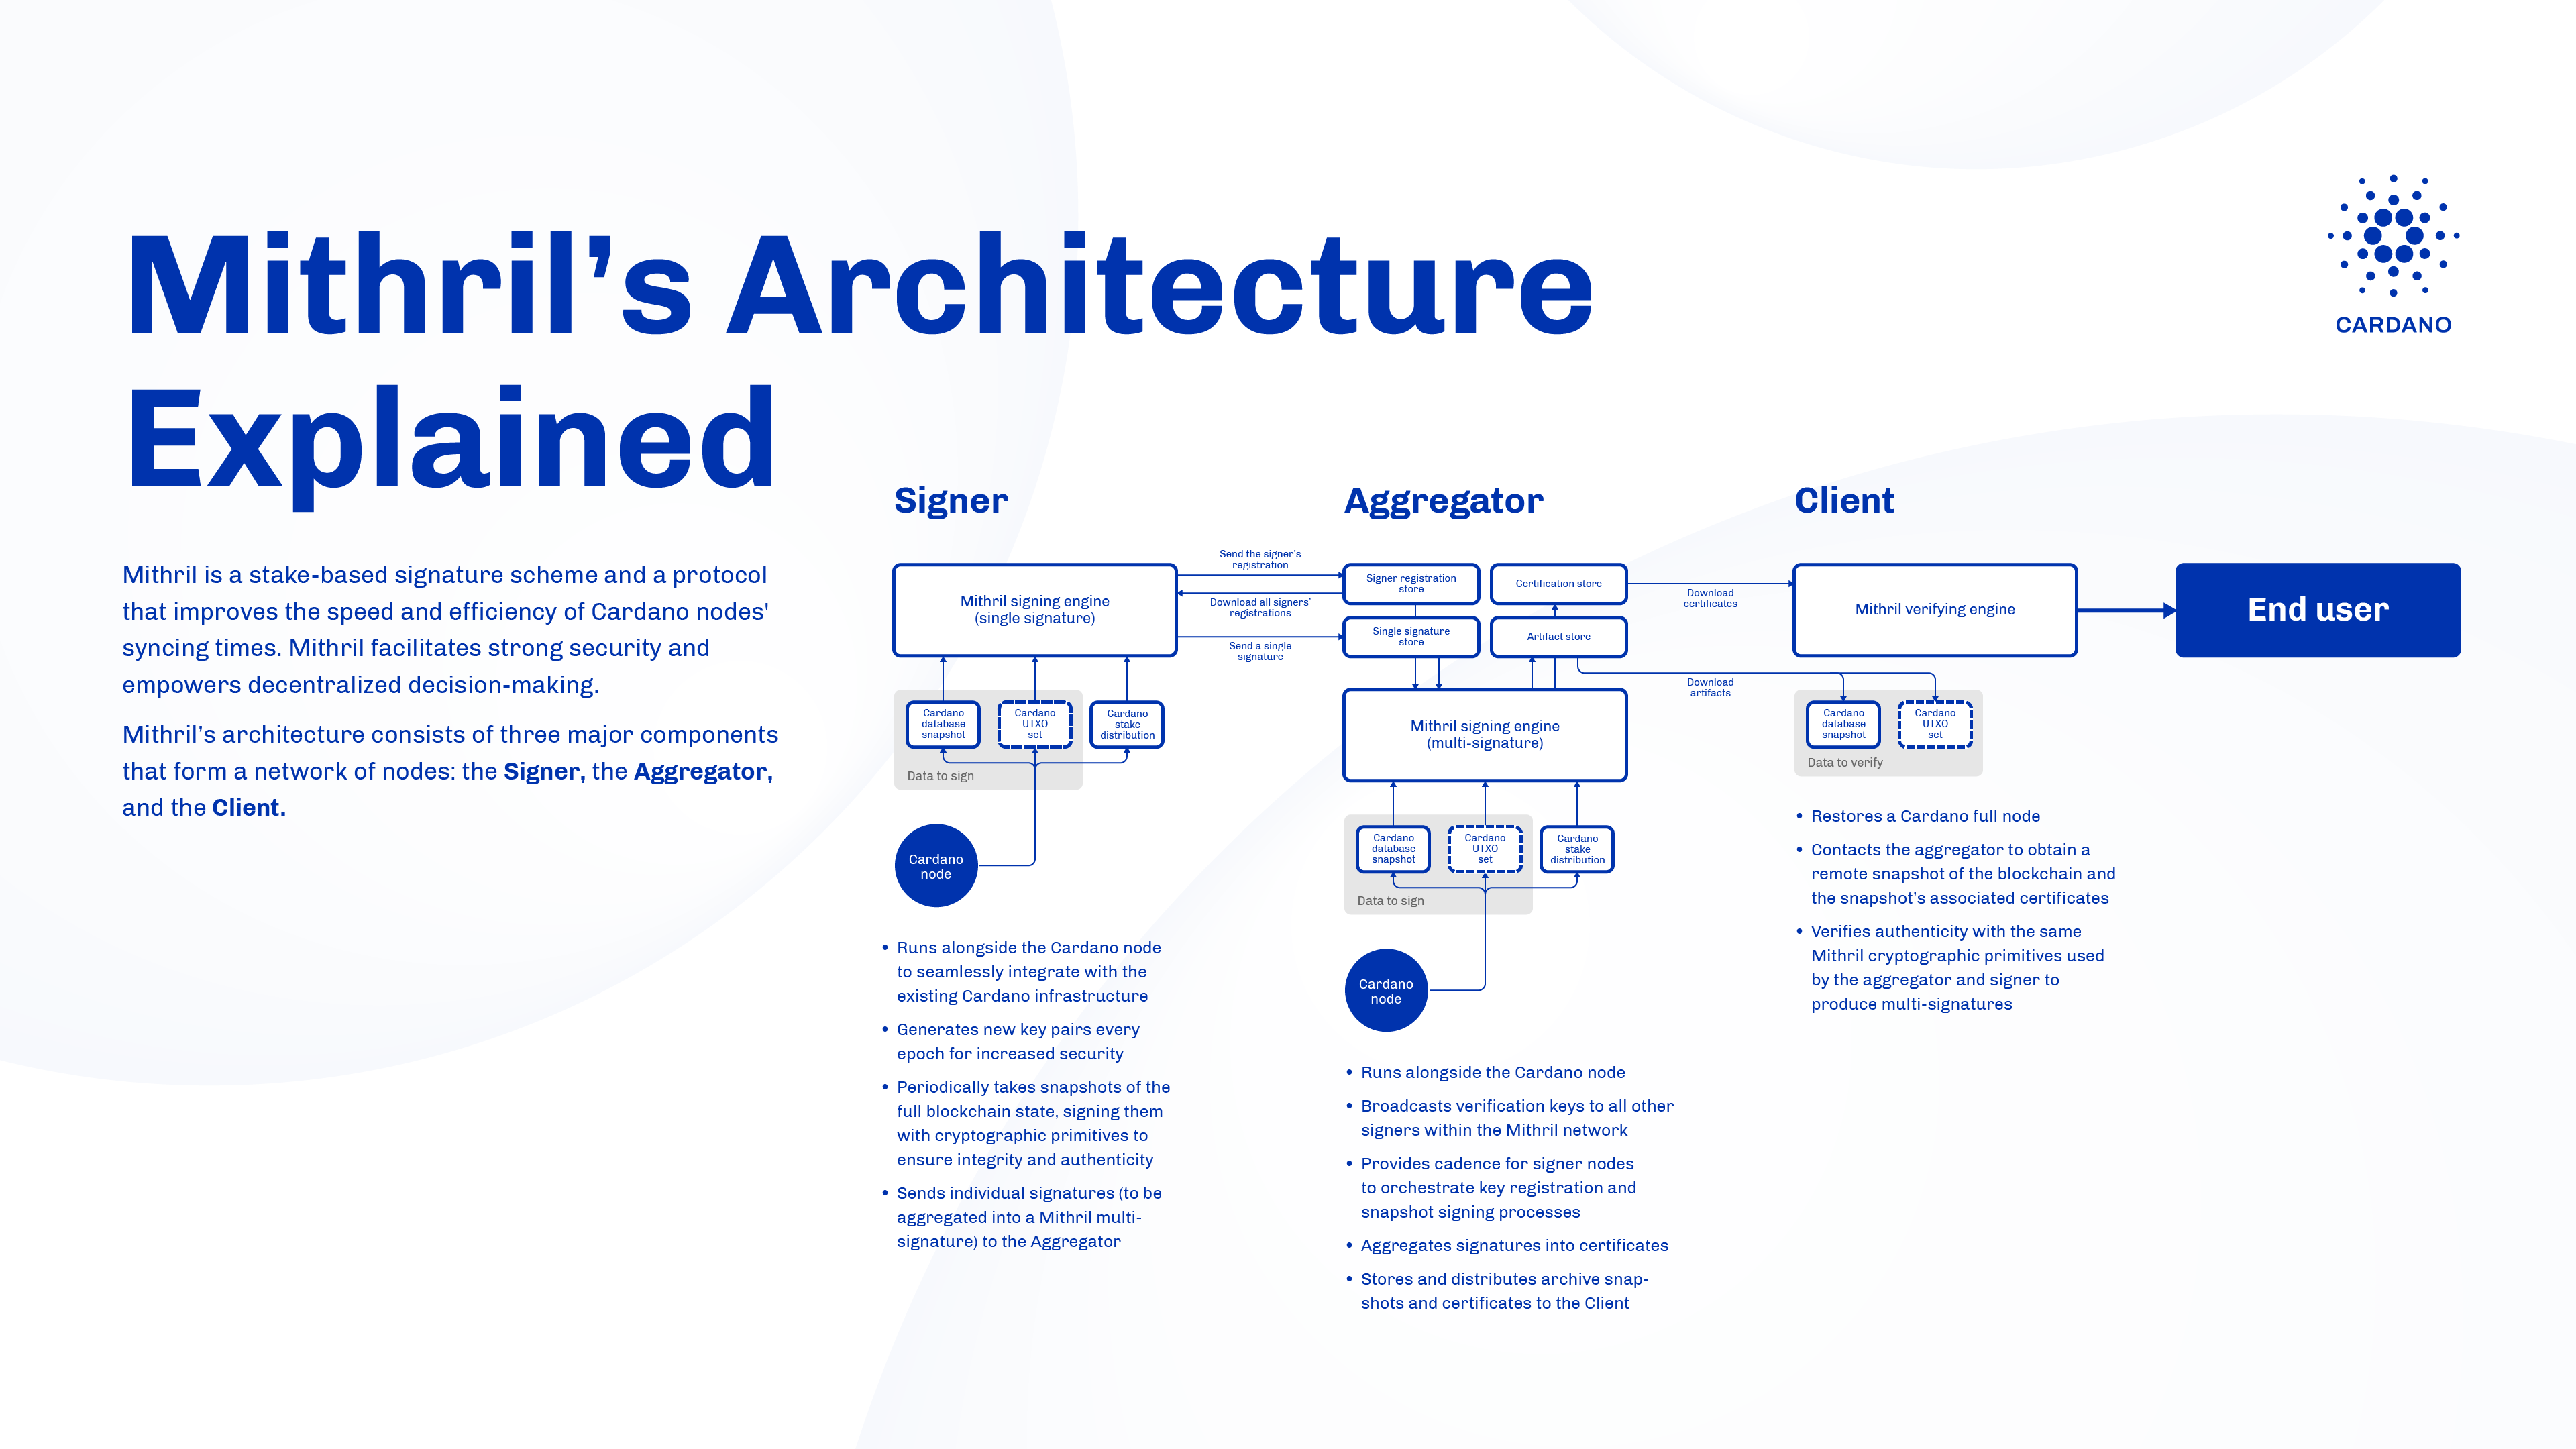 Mithril's Architecture Explained